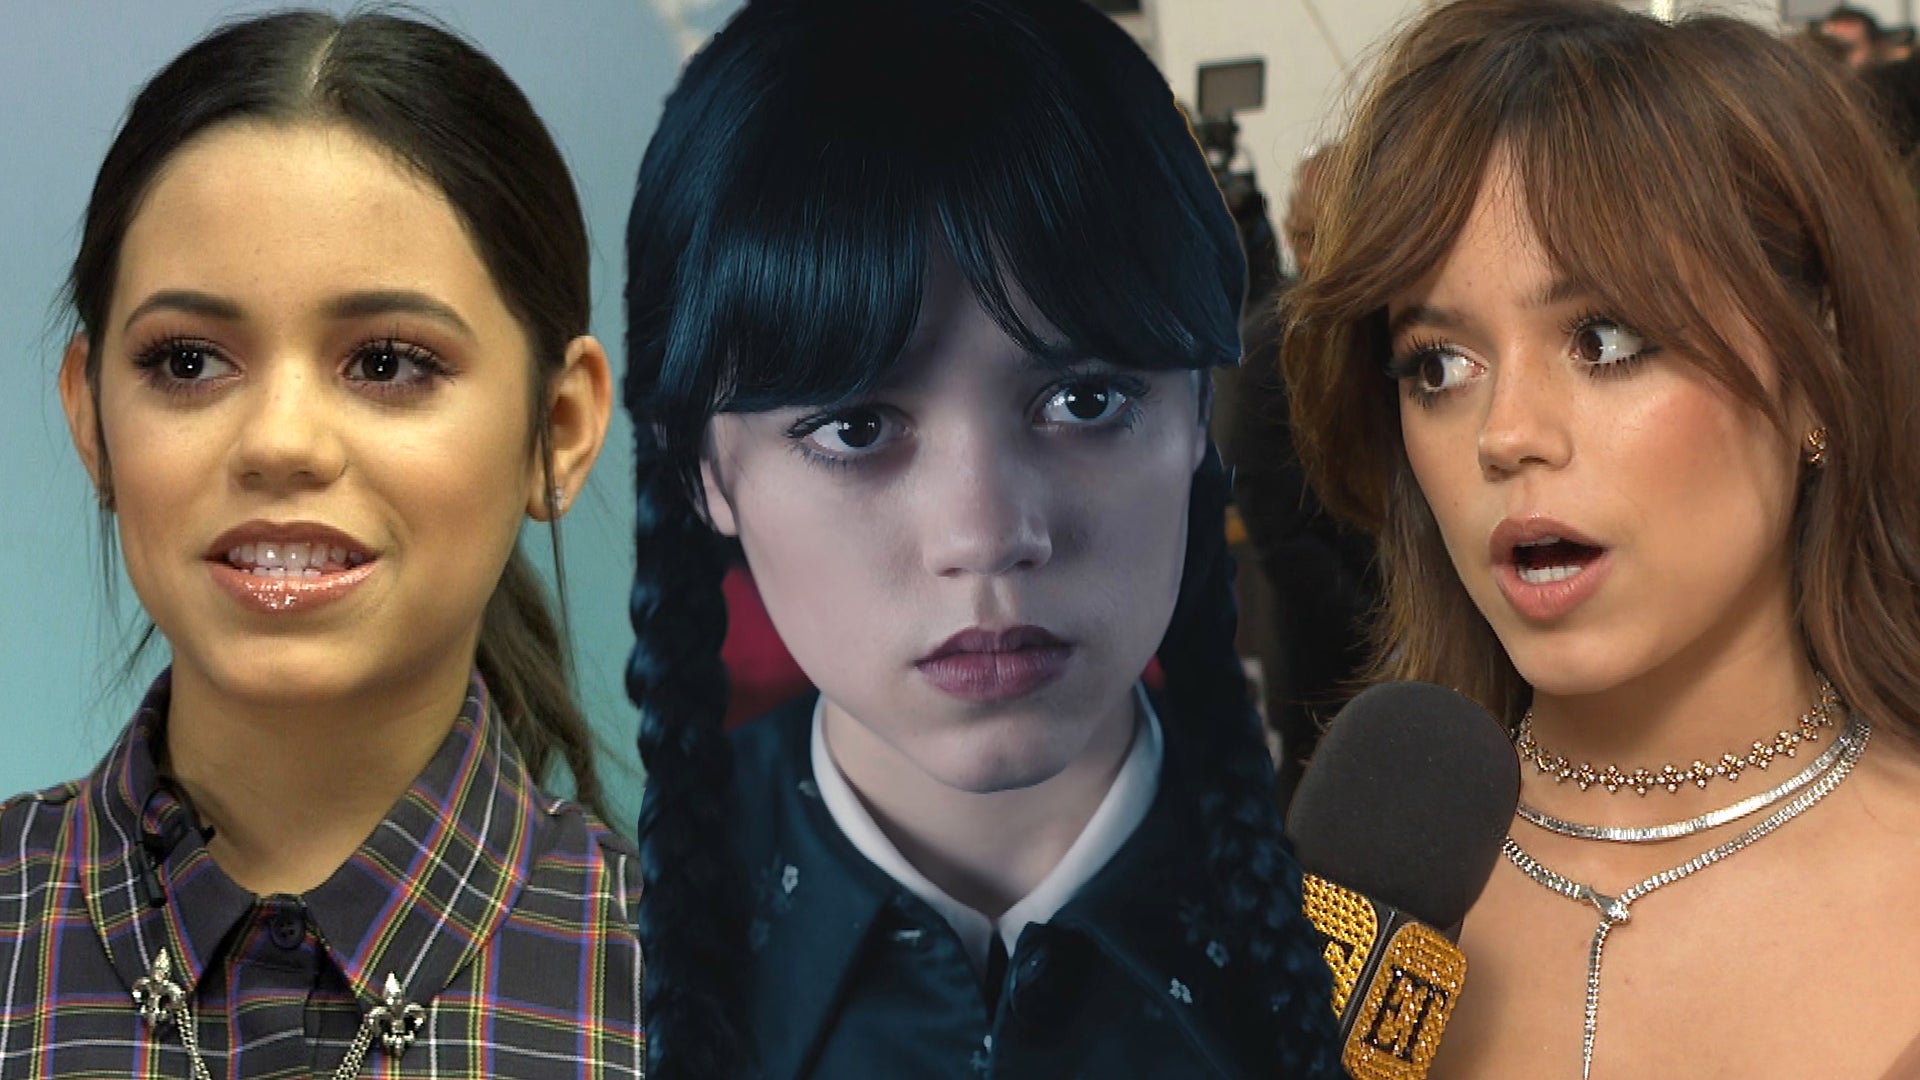 SAGs 2023: Viewers demand Jenna Ortega and Aubrey Plaza co-star as sisters  after they present award